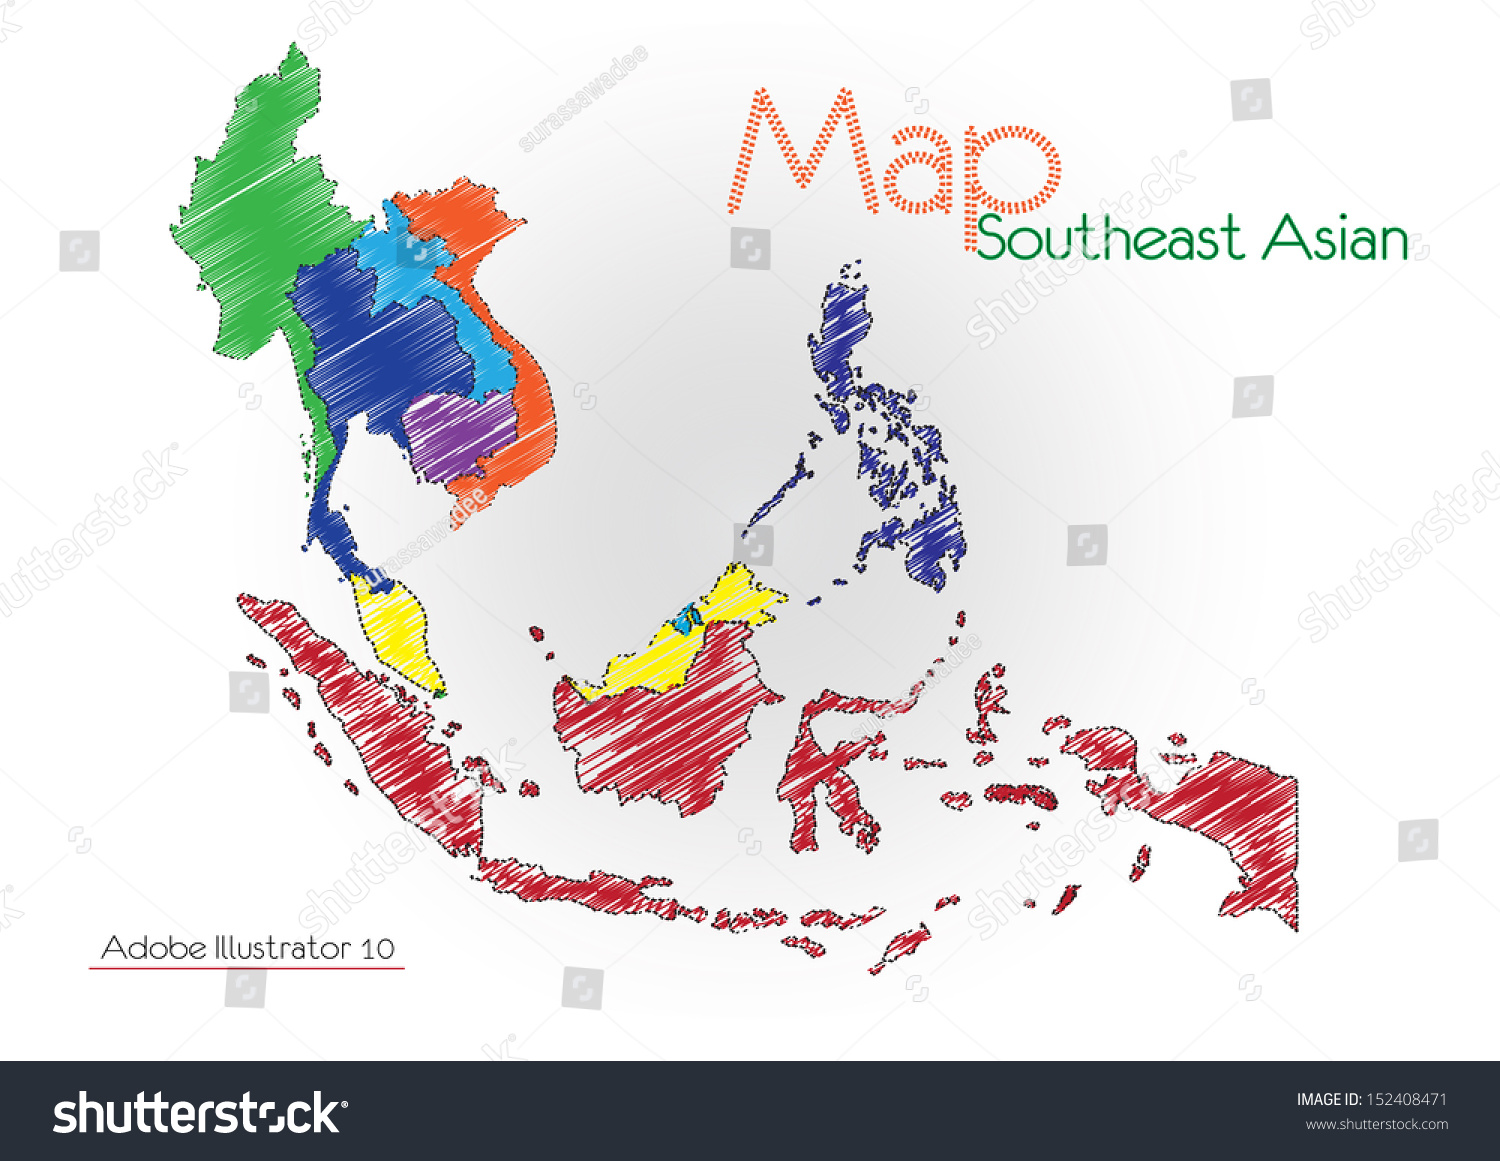 Southeast Asia Map Without Words 96